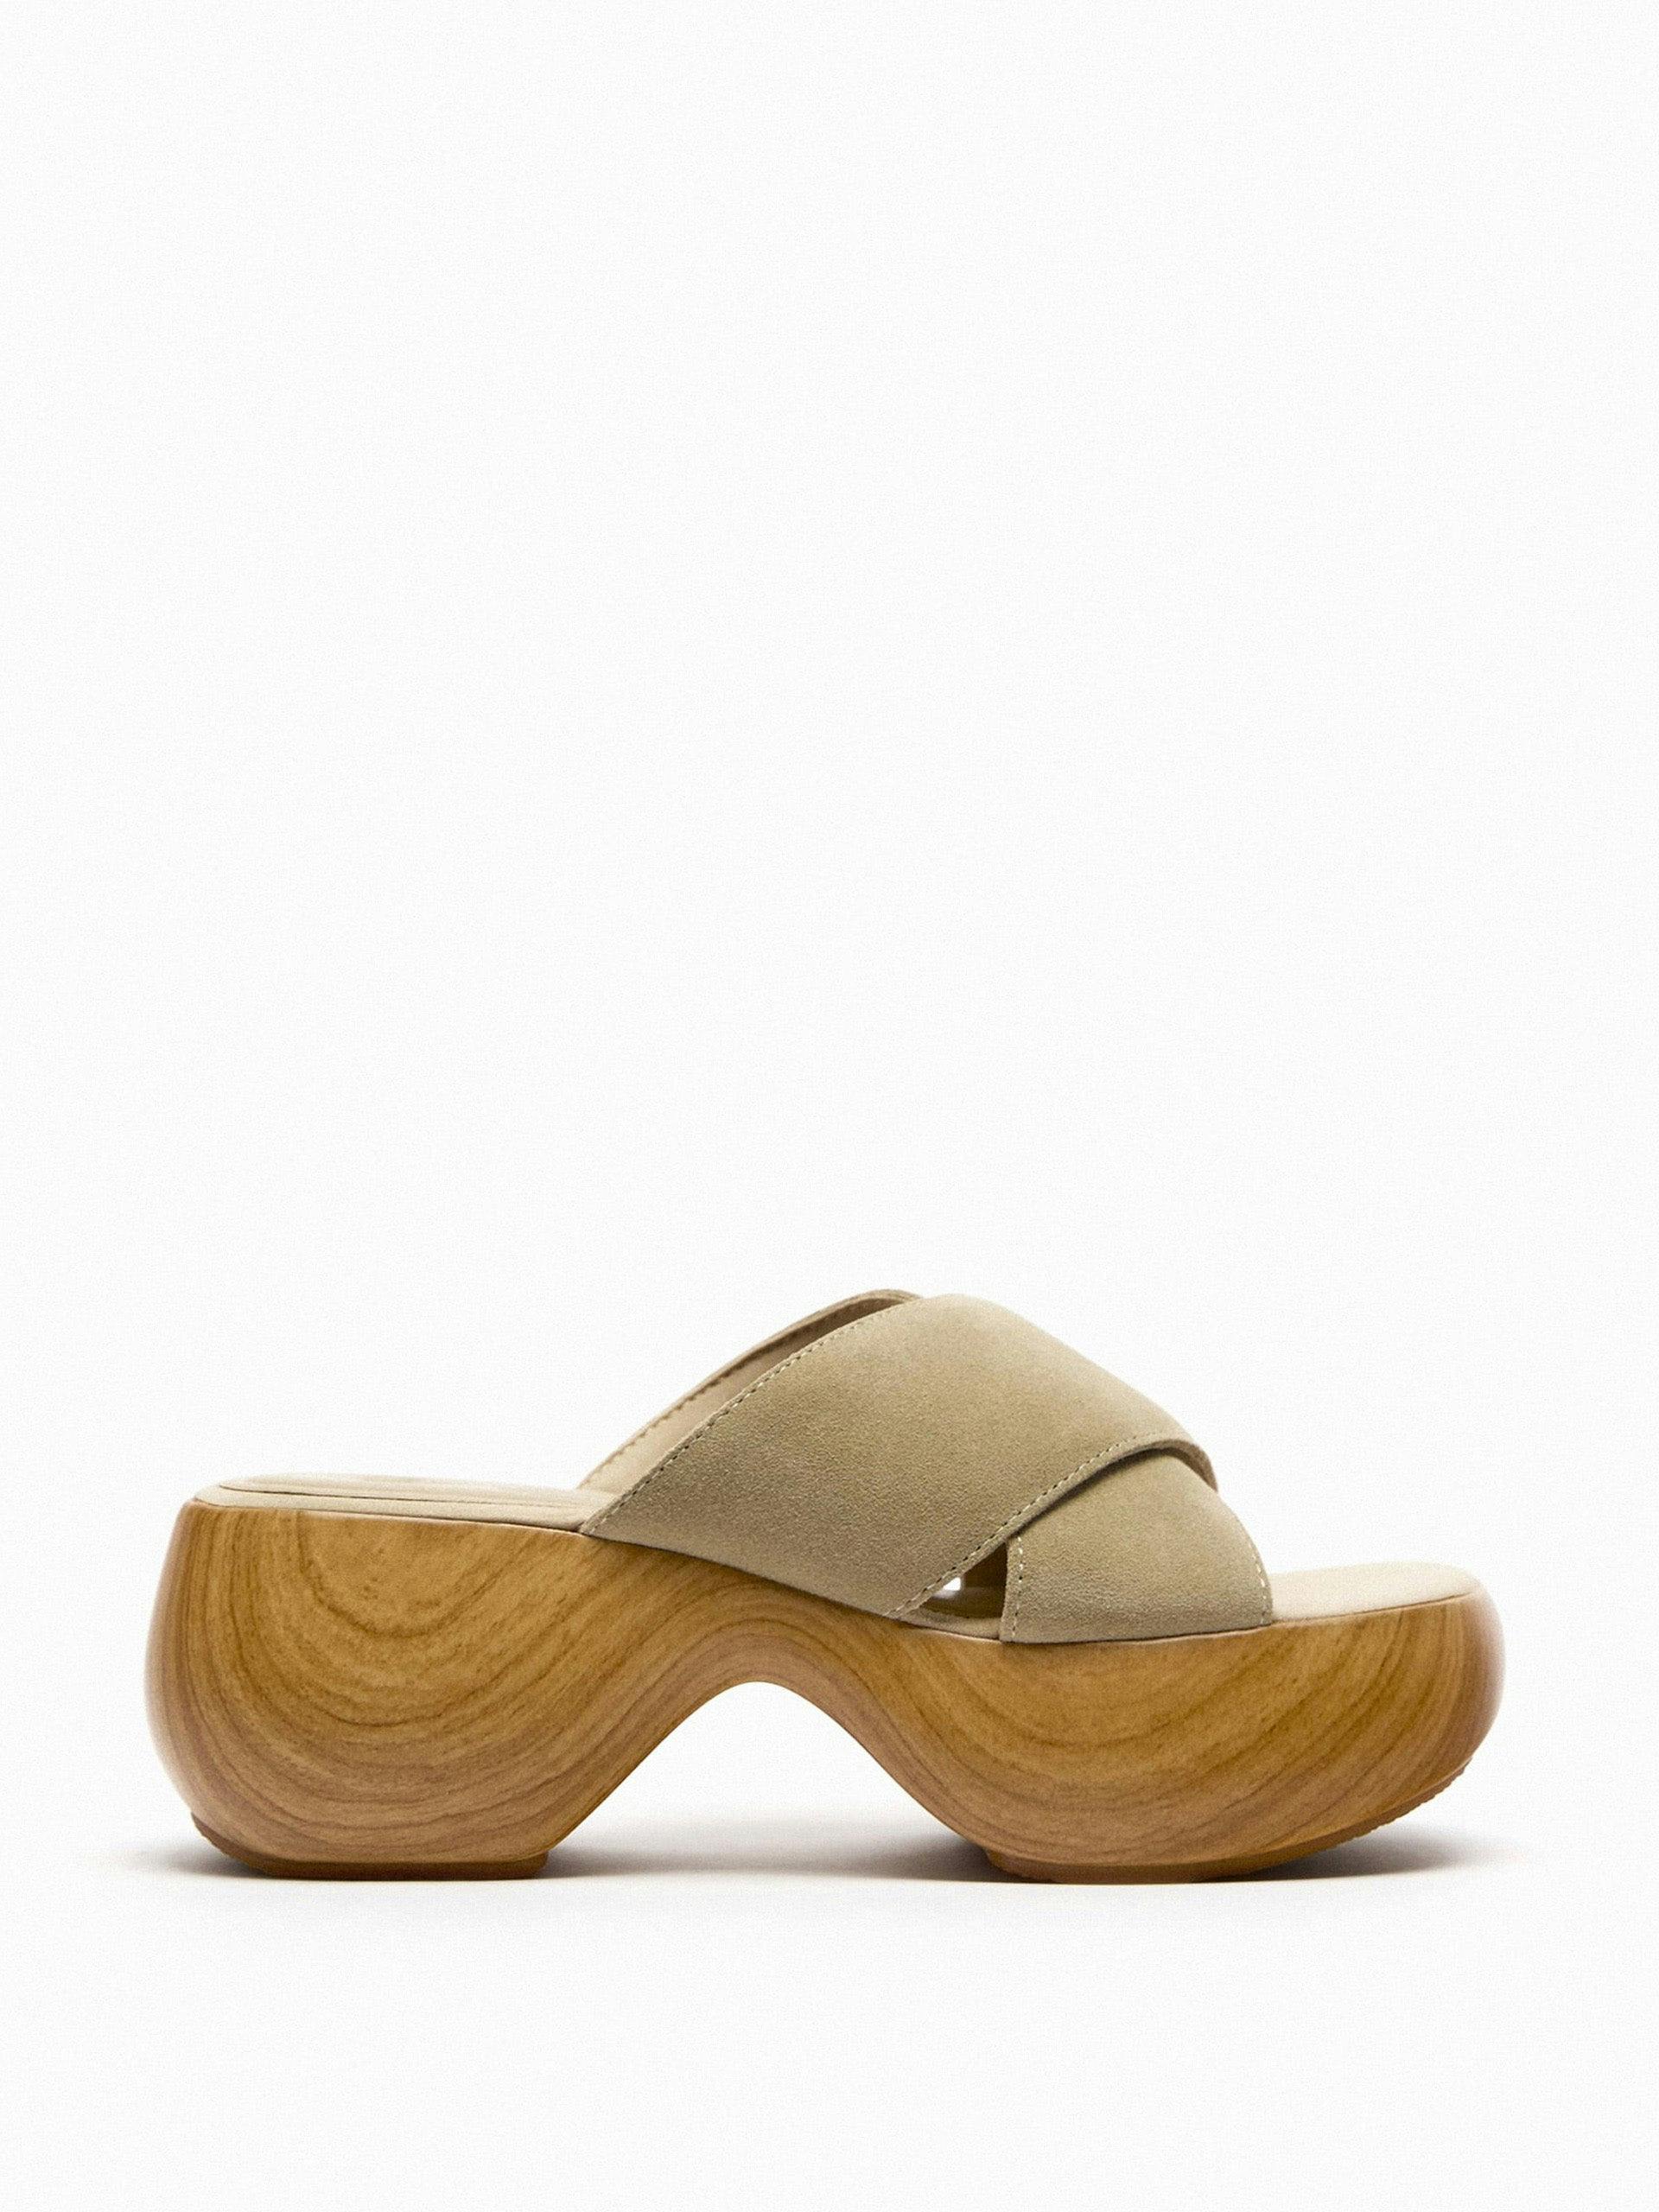 Chunky wood-effect and suede sandals